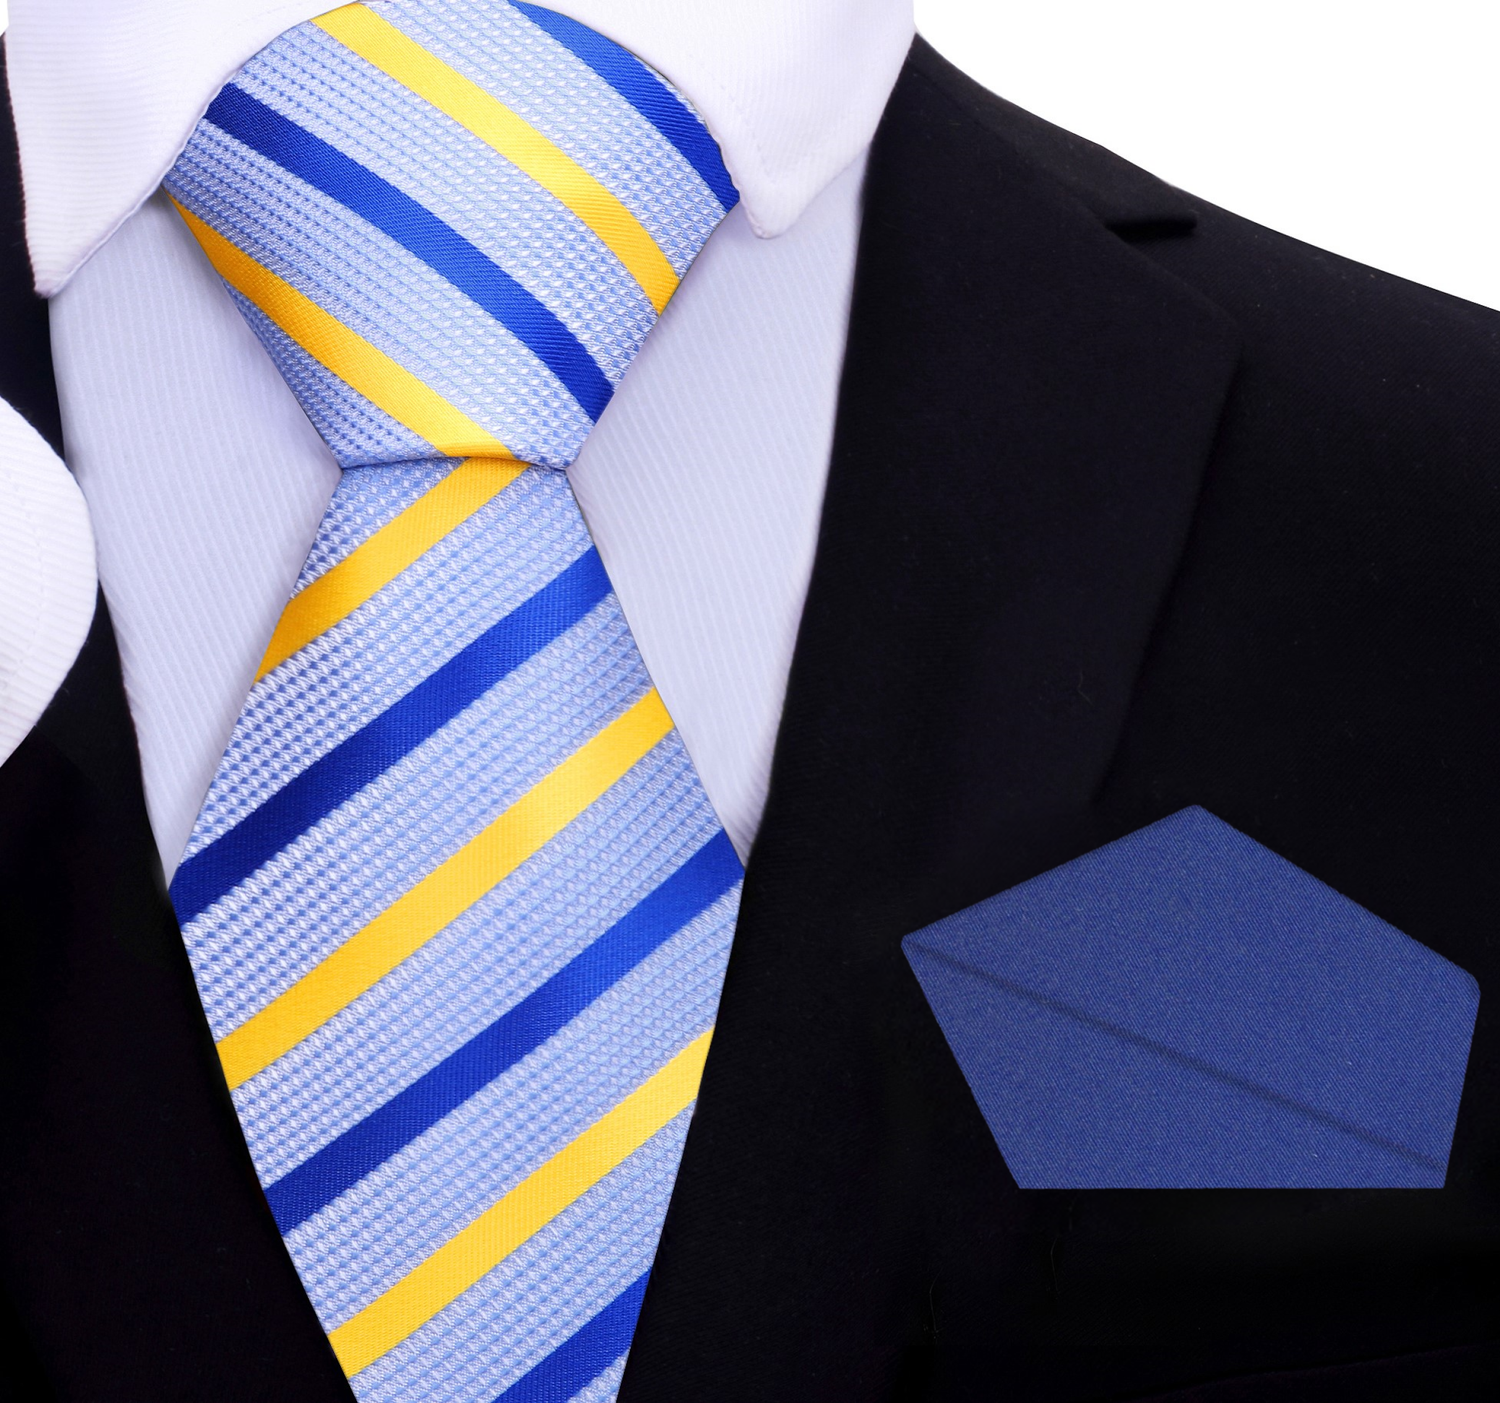 Light Blue, Blue, Yellow Stripe Tie and Blue Square